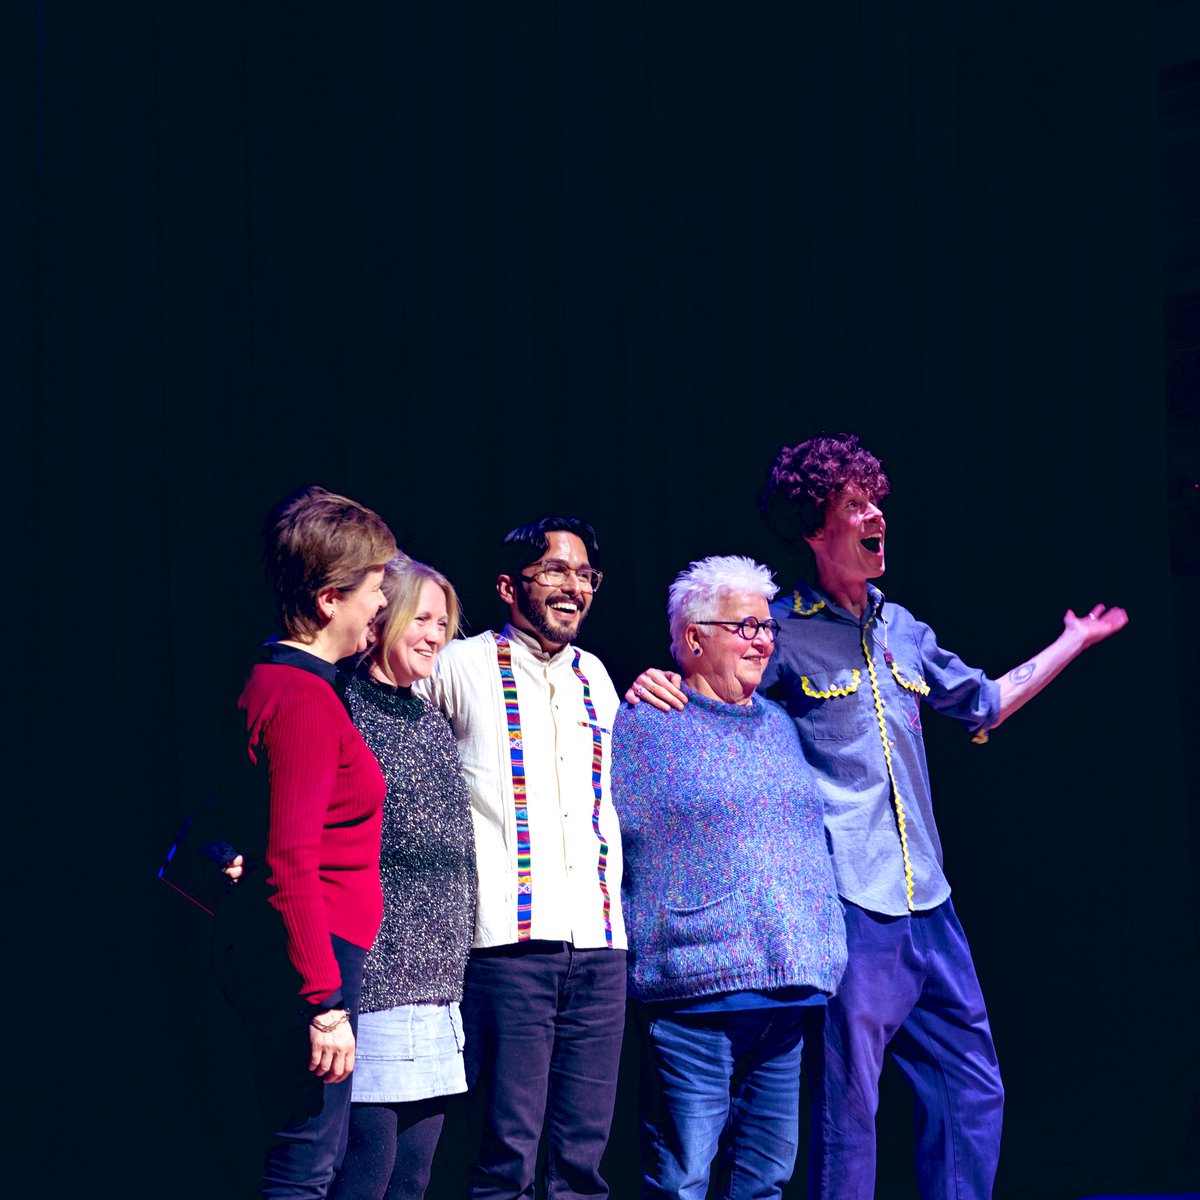 The band got back thegither for a gig at The @queens_hall. It’s Christmas after aw. Ft: @NicolaSturgeon @valmcdermid @holliepoetry @AndresNOrdorica & me. Raised some money for @superpow3 too. 📸 by Shaun Murawski & @littlekatphotos 🧡🩵💚💜💫.